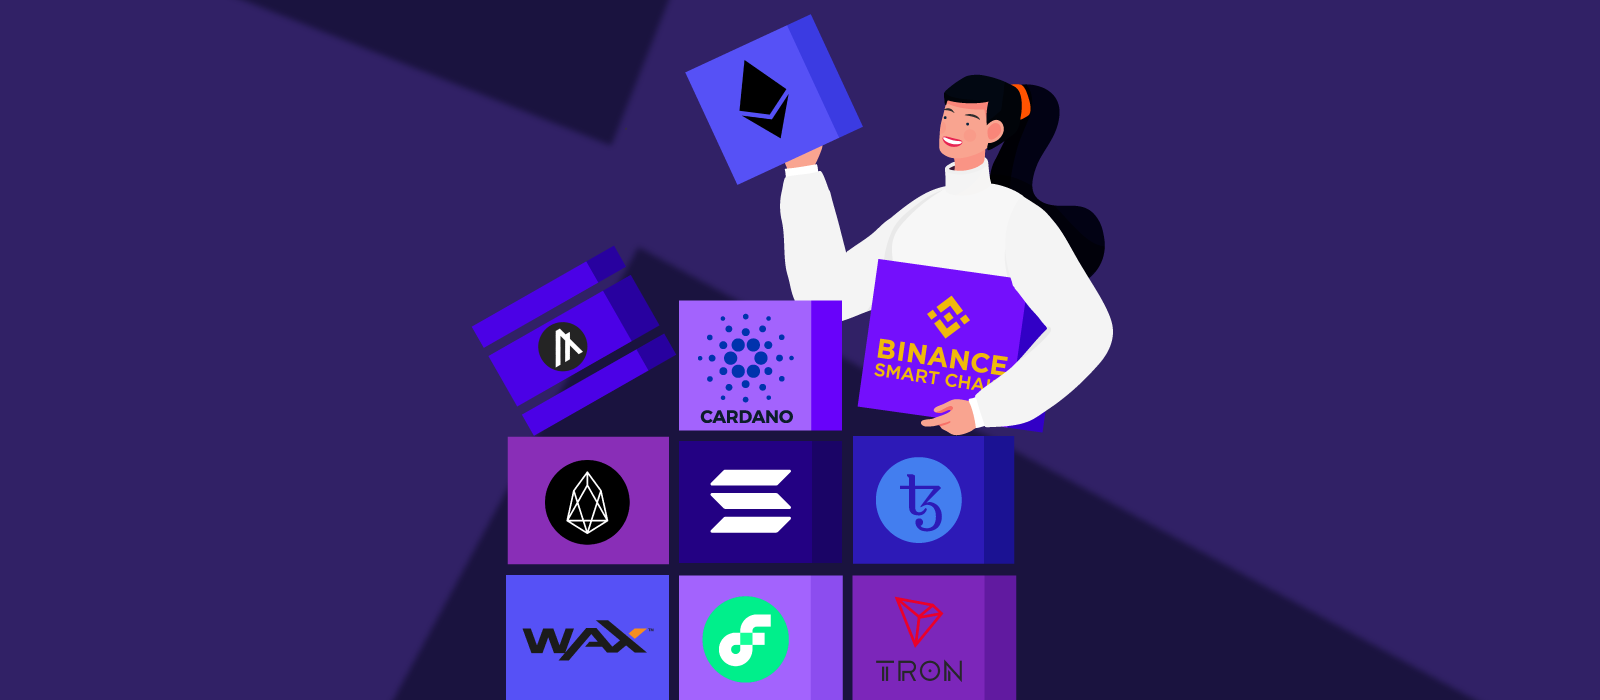 Ten boxes with logos of Ethereum, Flow, Binance Smart Chain, Cardano, Solana, EOS, WAX, Algorand, Tezos, and Iron and a person holding the boxes with Ethereum and Binance Smart Chain logos